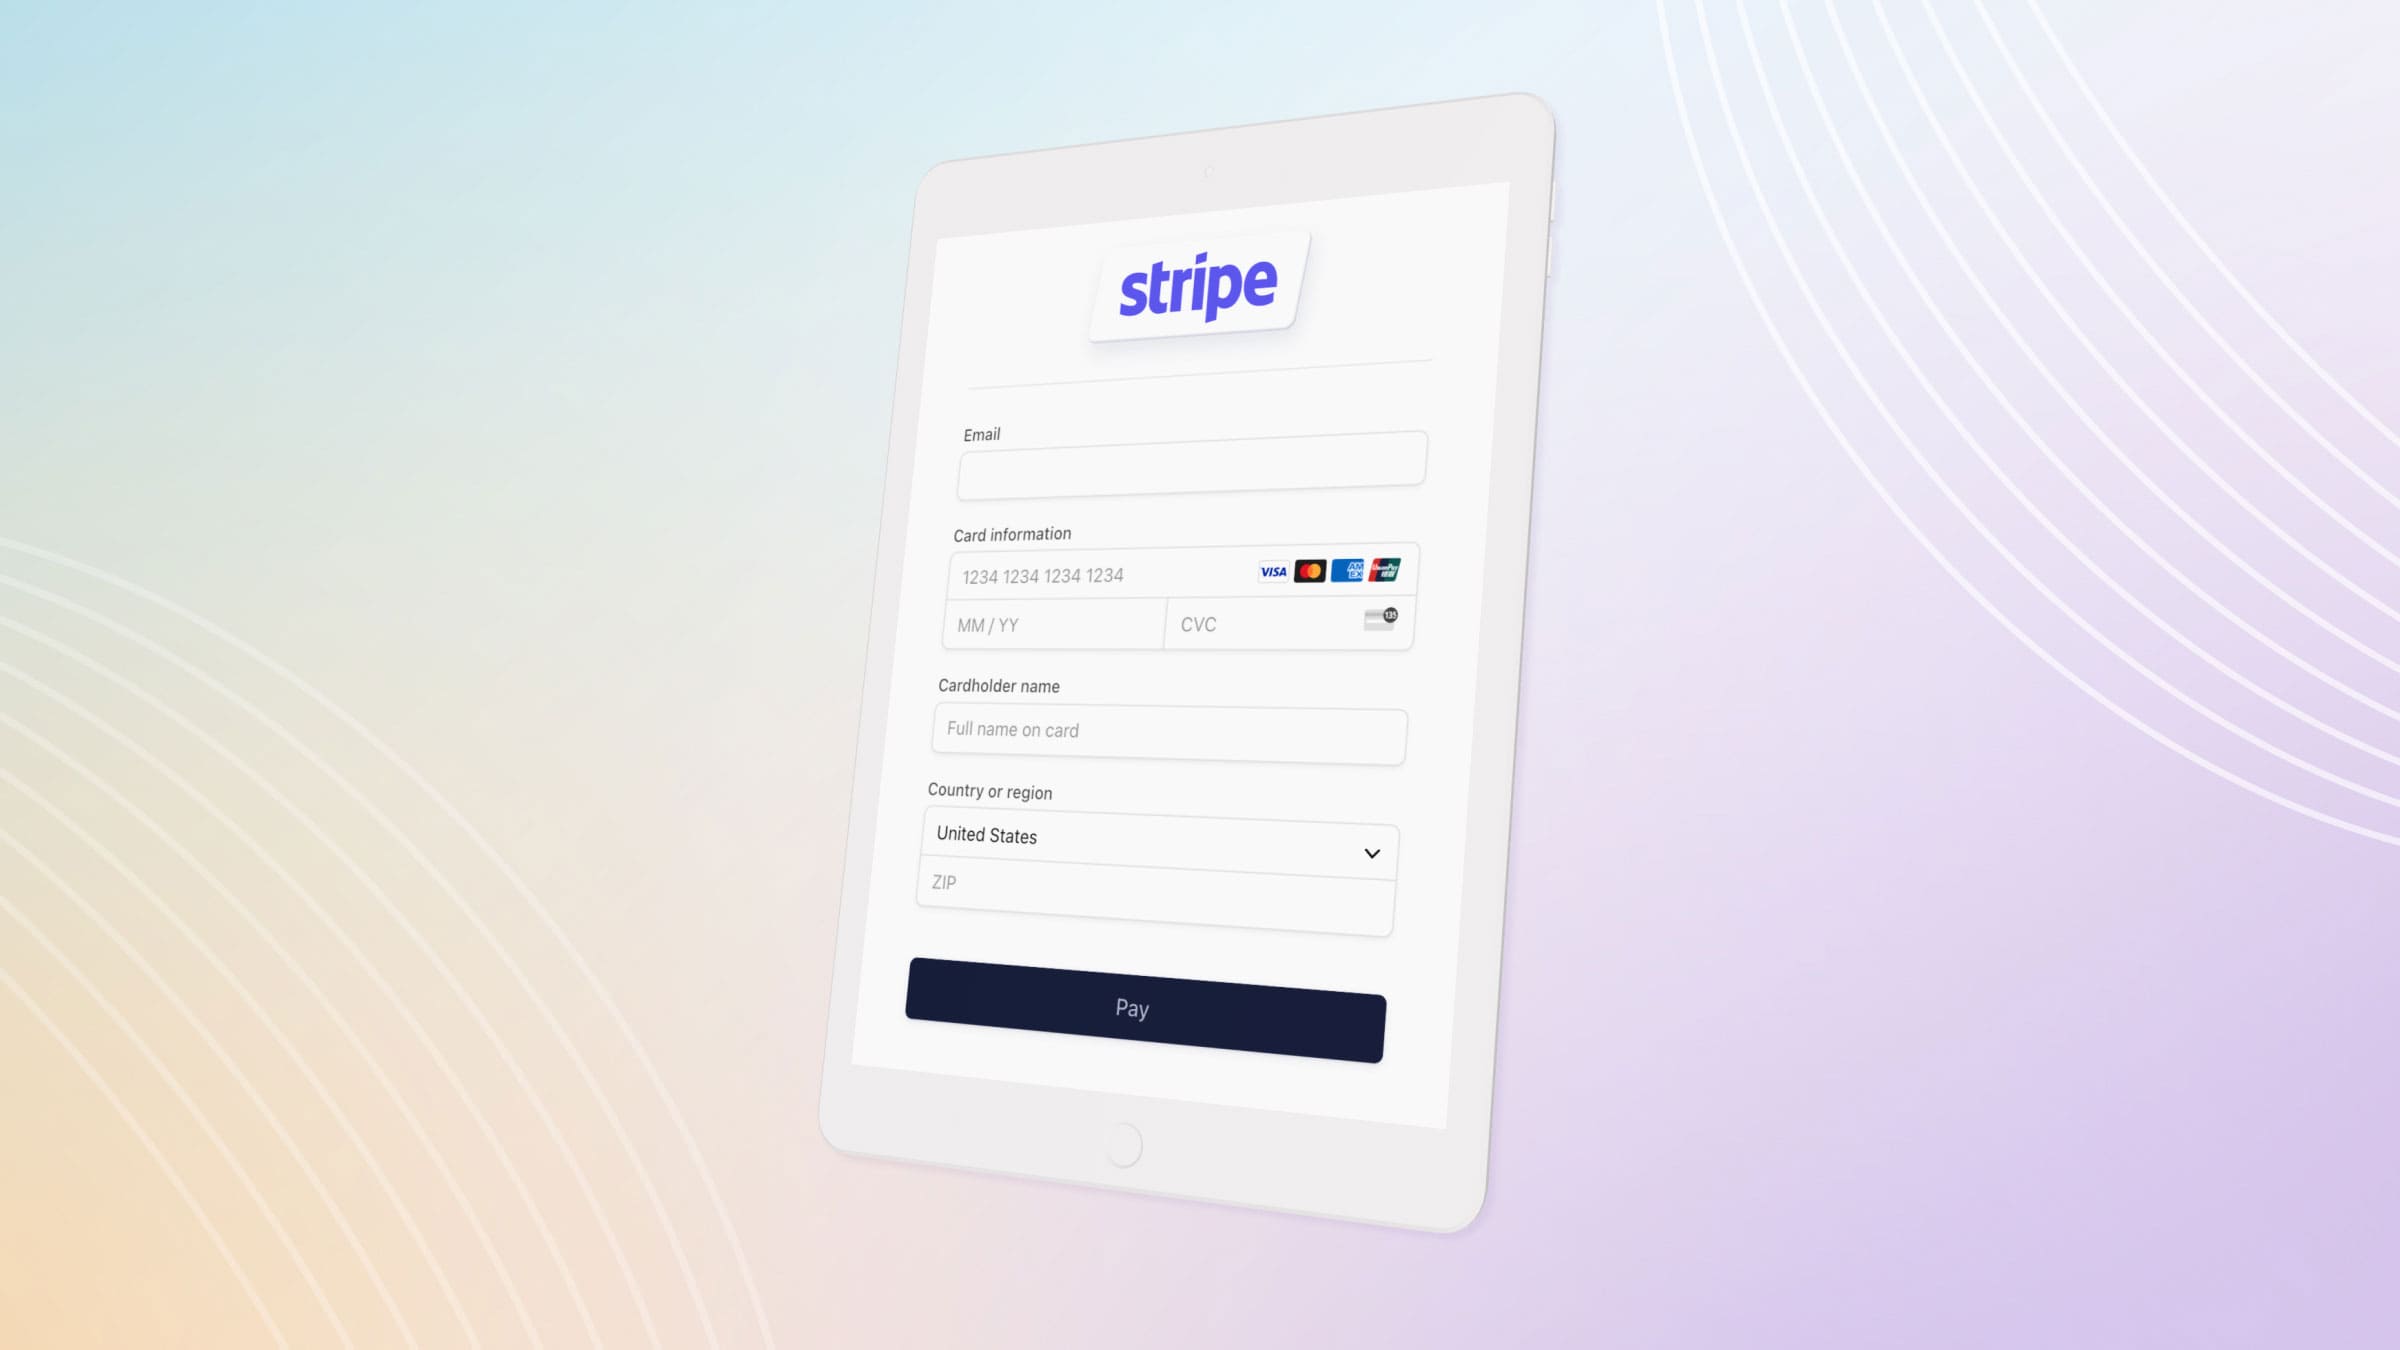 In order to connect Stripe, you must pass a risk assessment and company scope check.